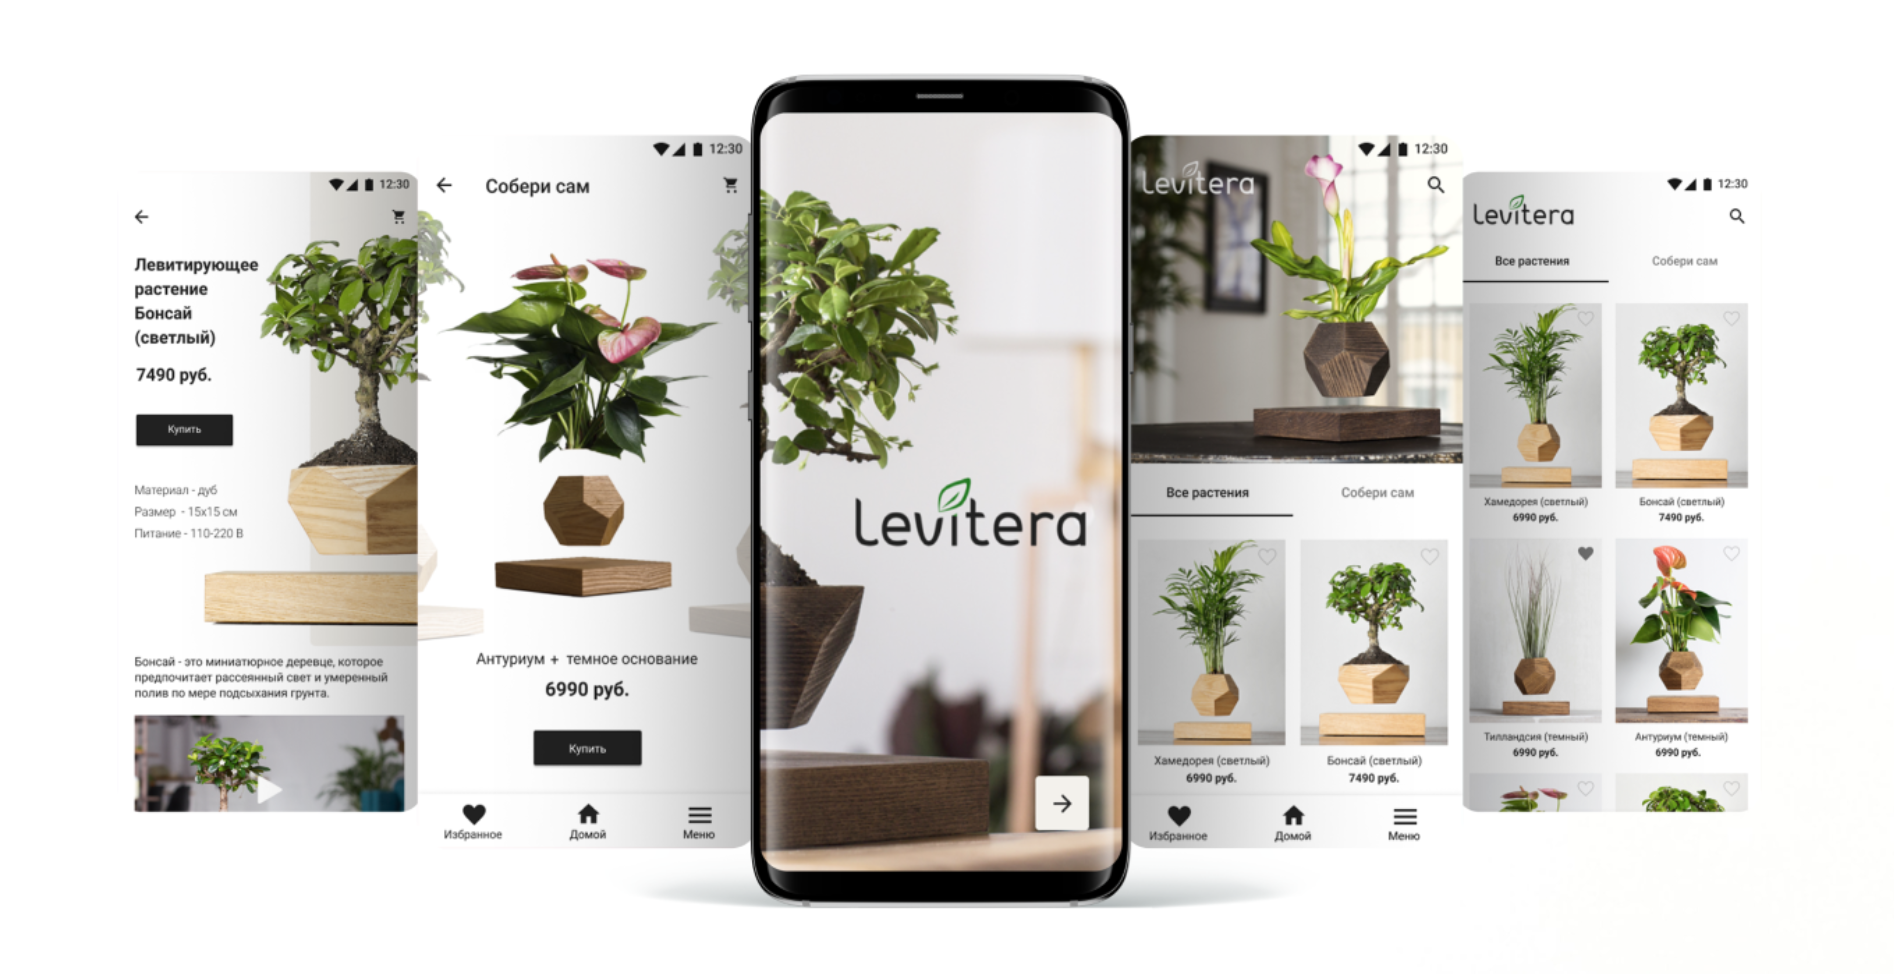 Download 30 Best Free Android Mockup Templates and Mockup Tools in 2020（Updated）